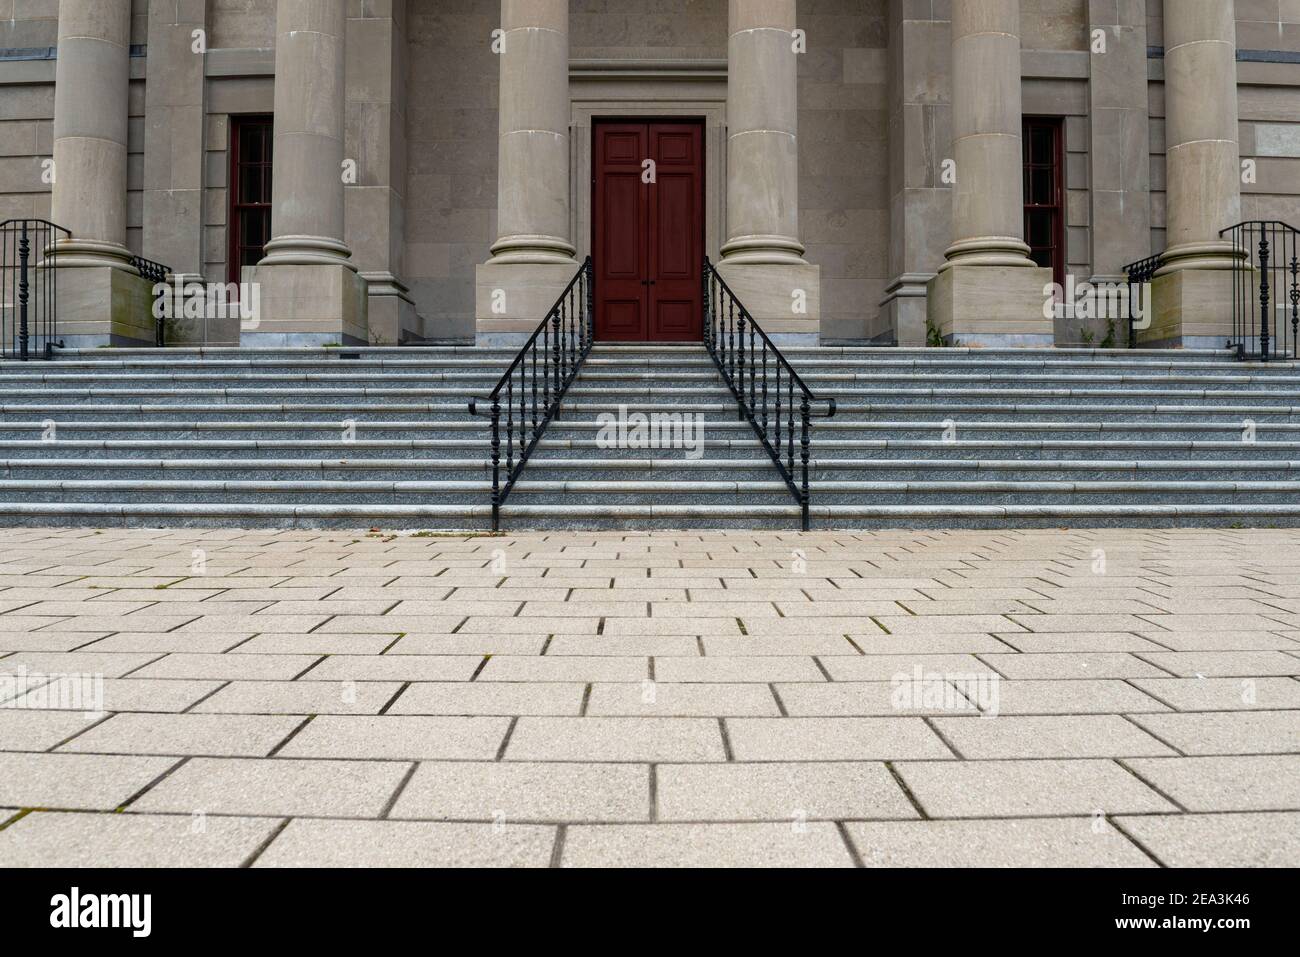 Six large round concrete columns at the top of marble steps with black iron rails to a legal building. The government building has a tall red door. Stock Photo